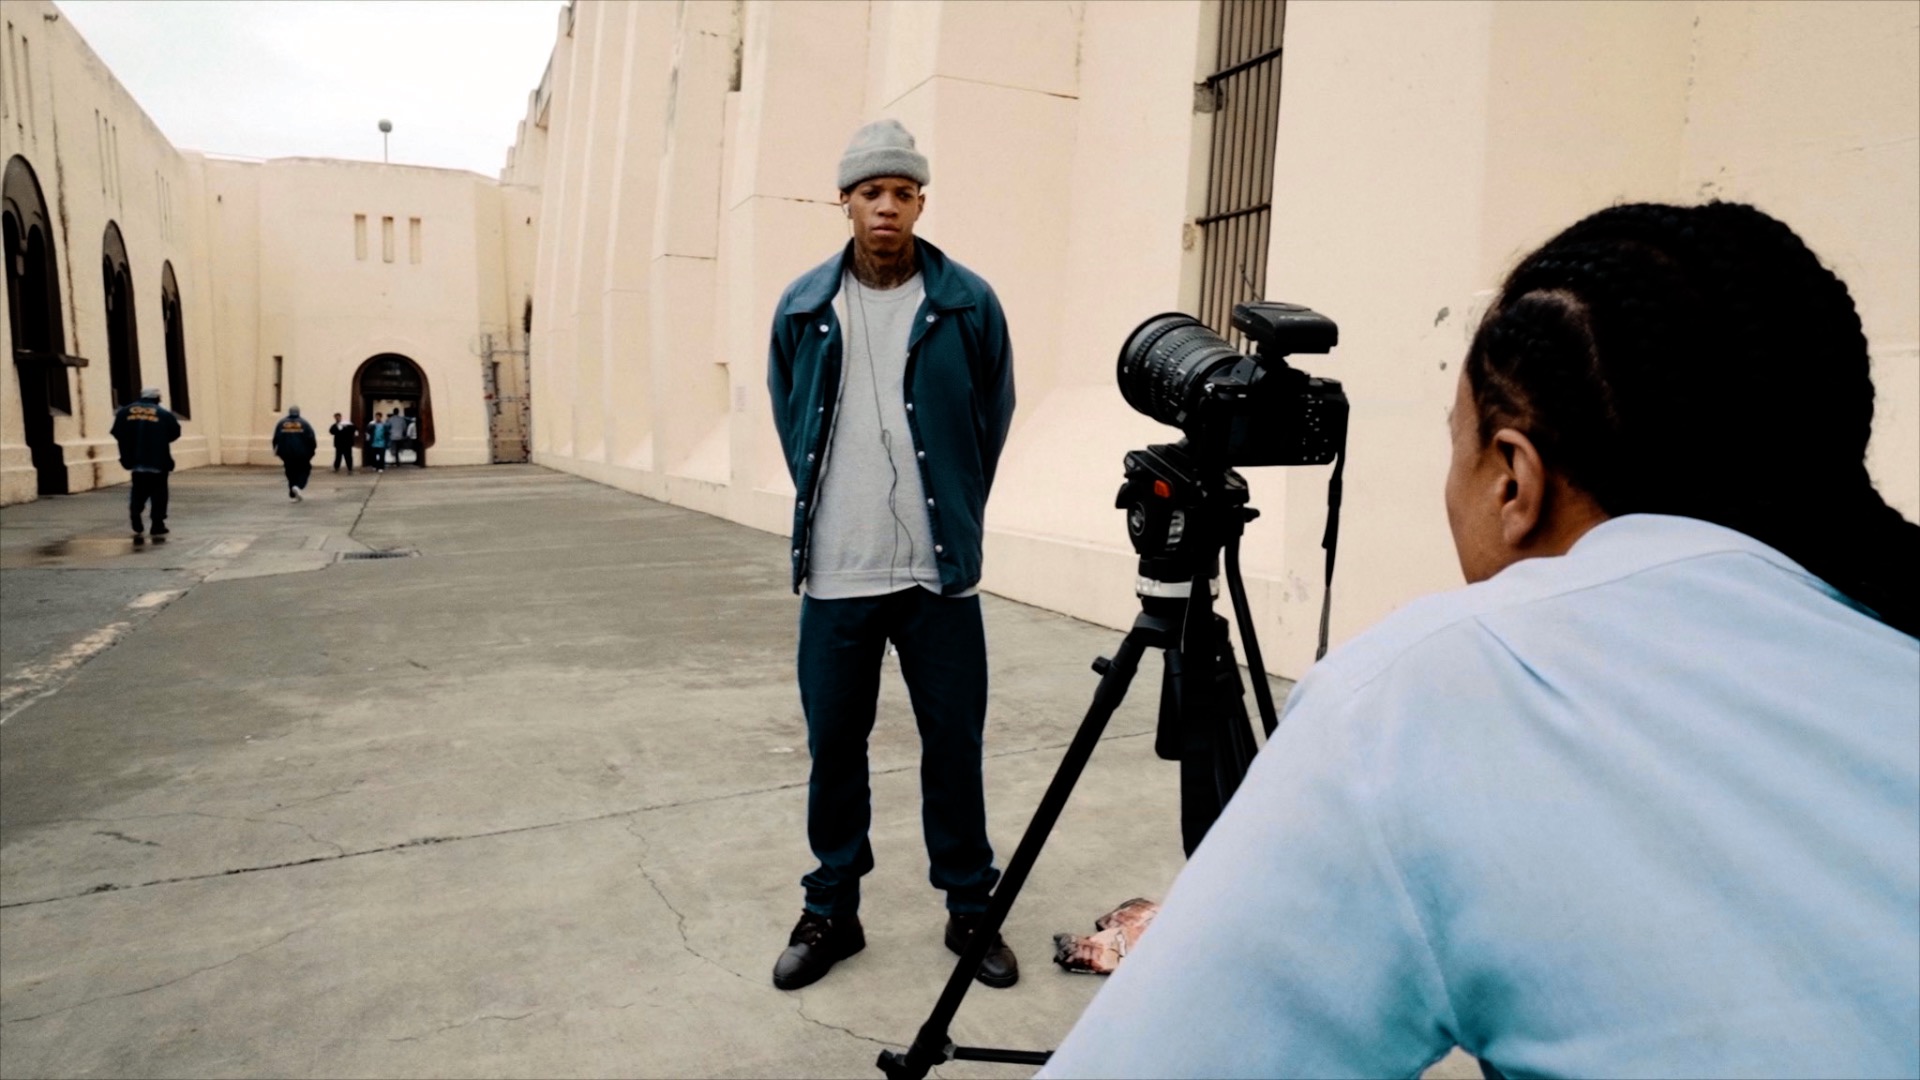 Images courtesy of "What These Walls Won't Hold" film: A photograph of a young Black man standing in front of a camera on a tripod being interviewed, with the filmmaker's back in the foreground.